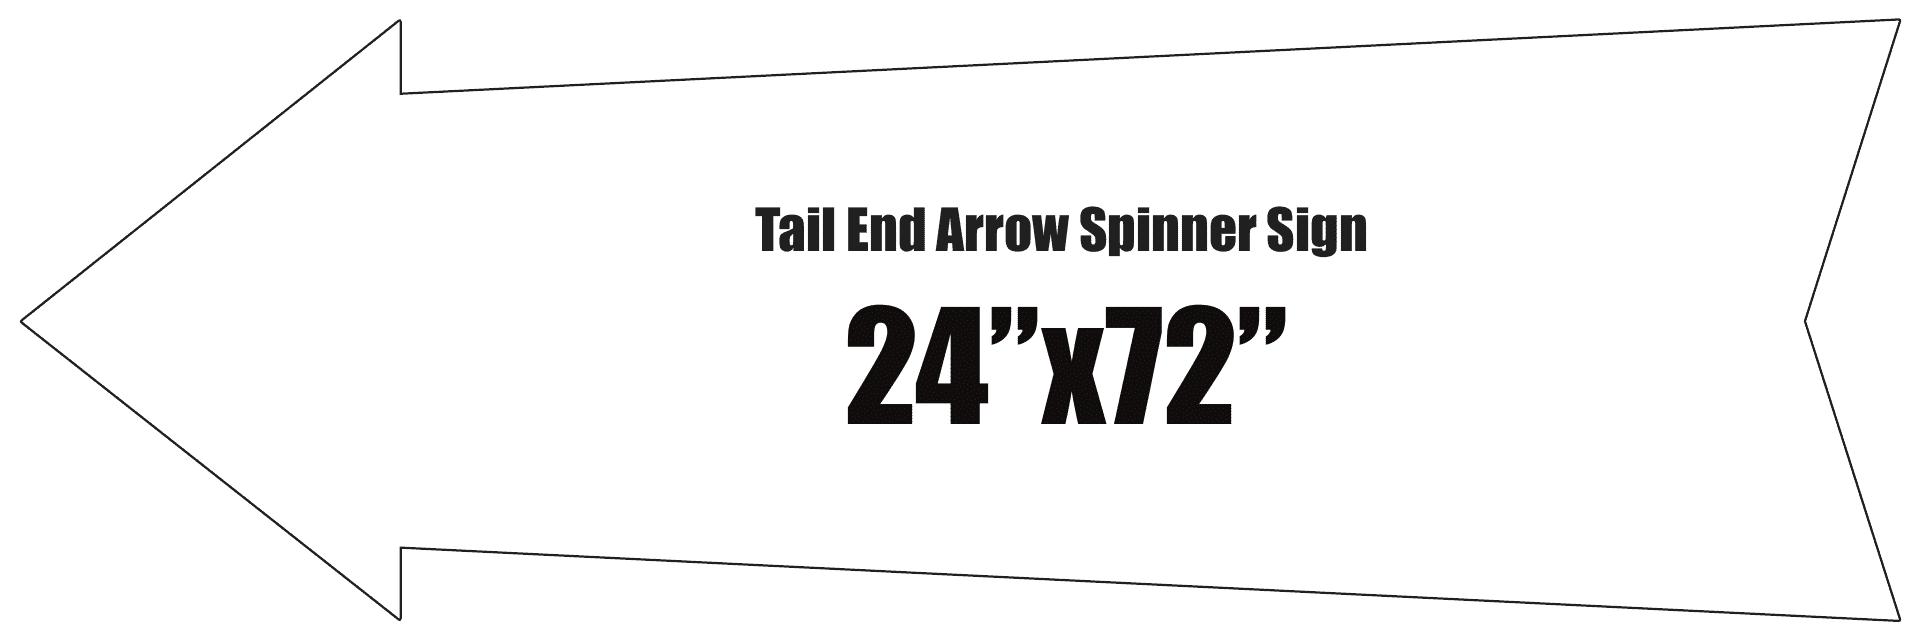 24"x72" Tail End Arrow Spinner Sign Template Download Pdf